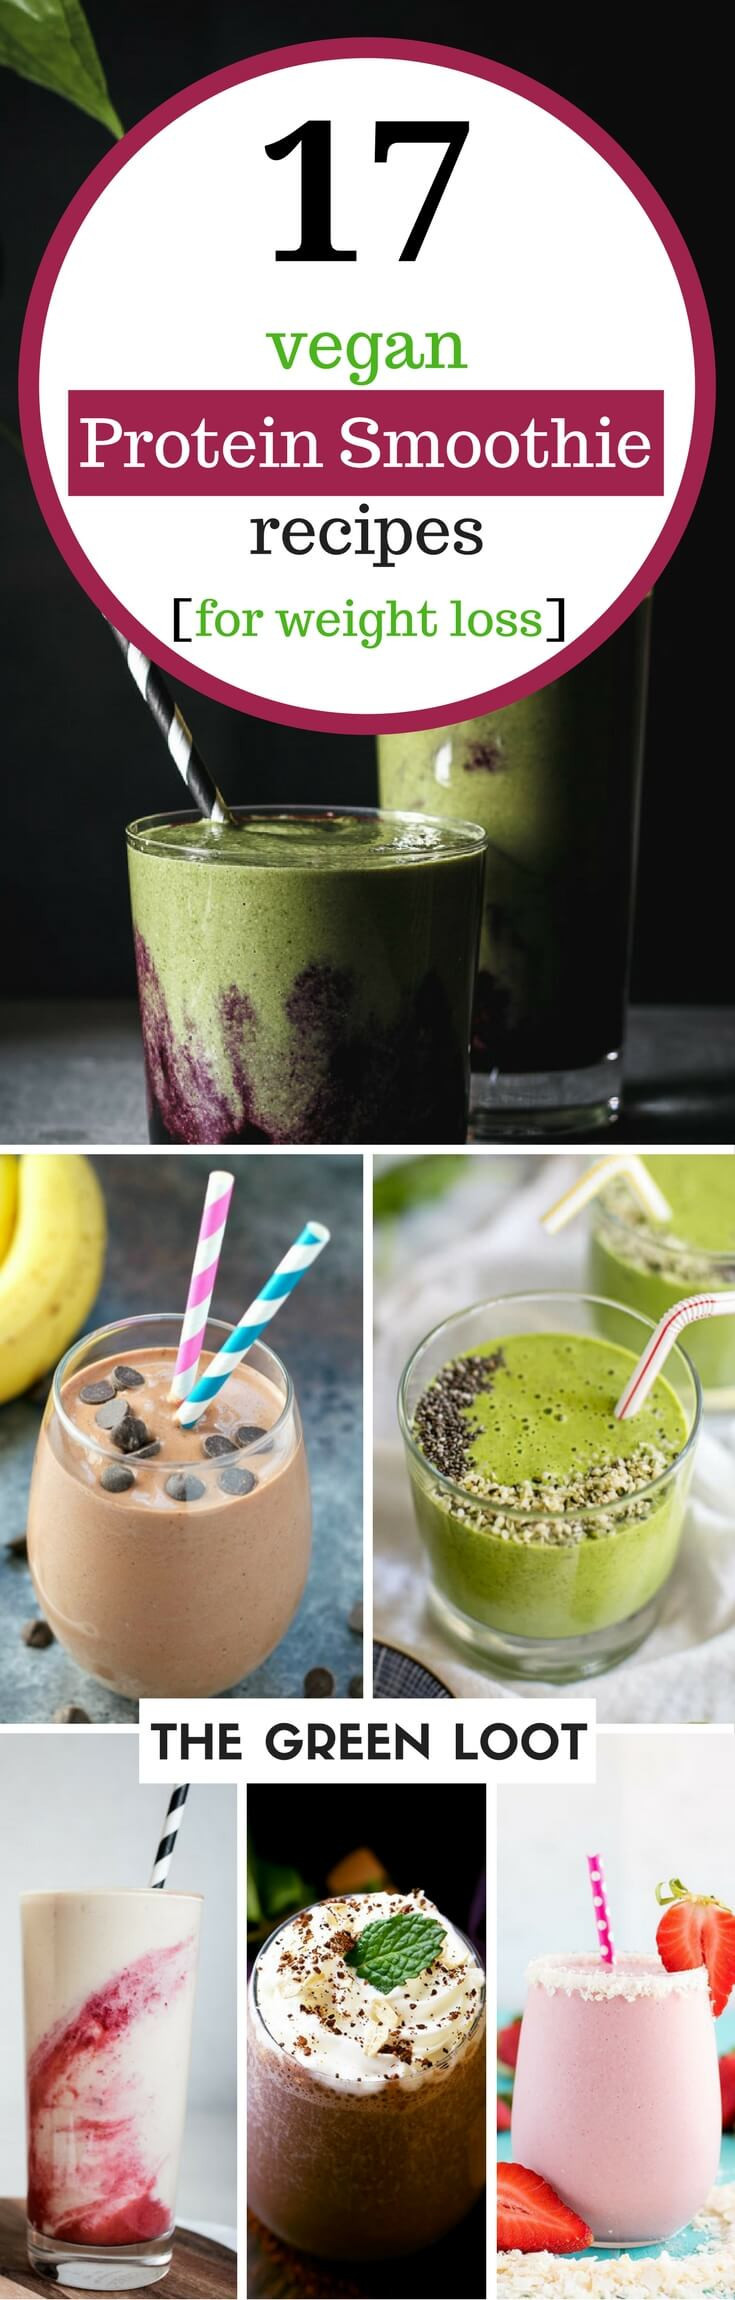 Dairy Free Smoothies For Weight Loss
 The Best Dairy Free Smoothies for Weight Loss Best Round